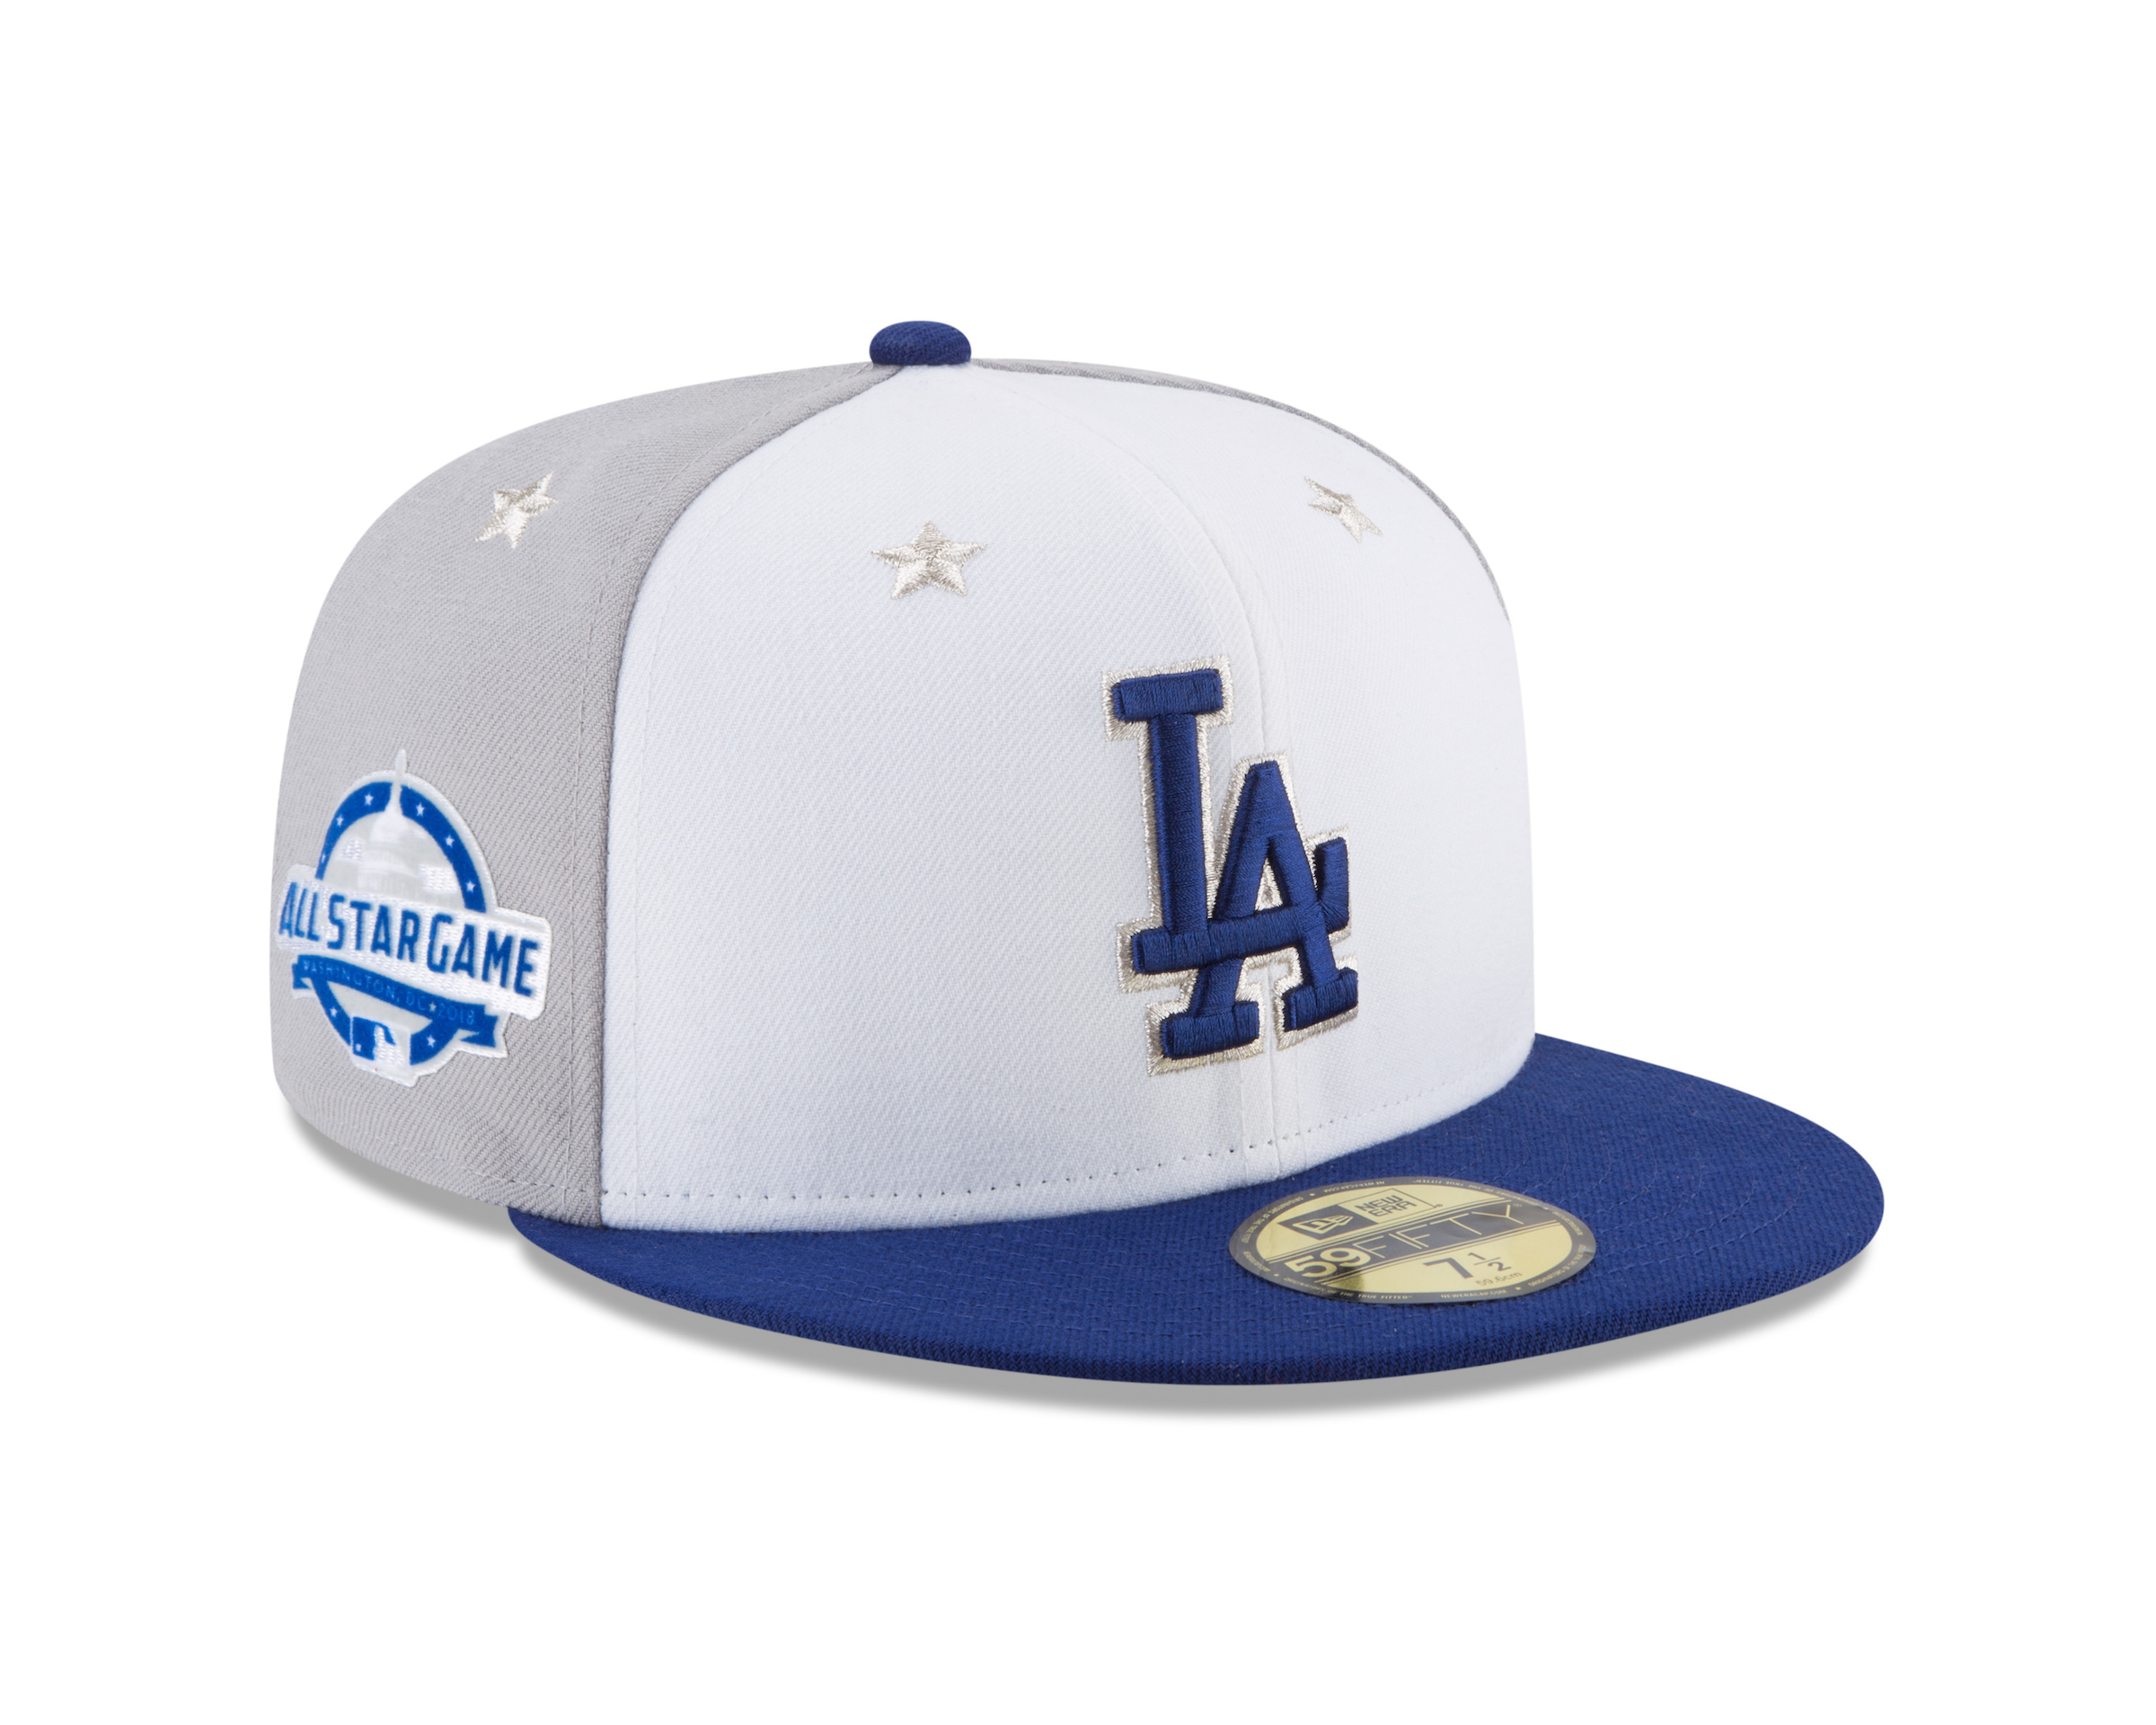 la dodgers all star game jersey